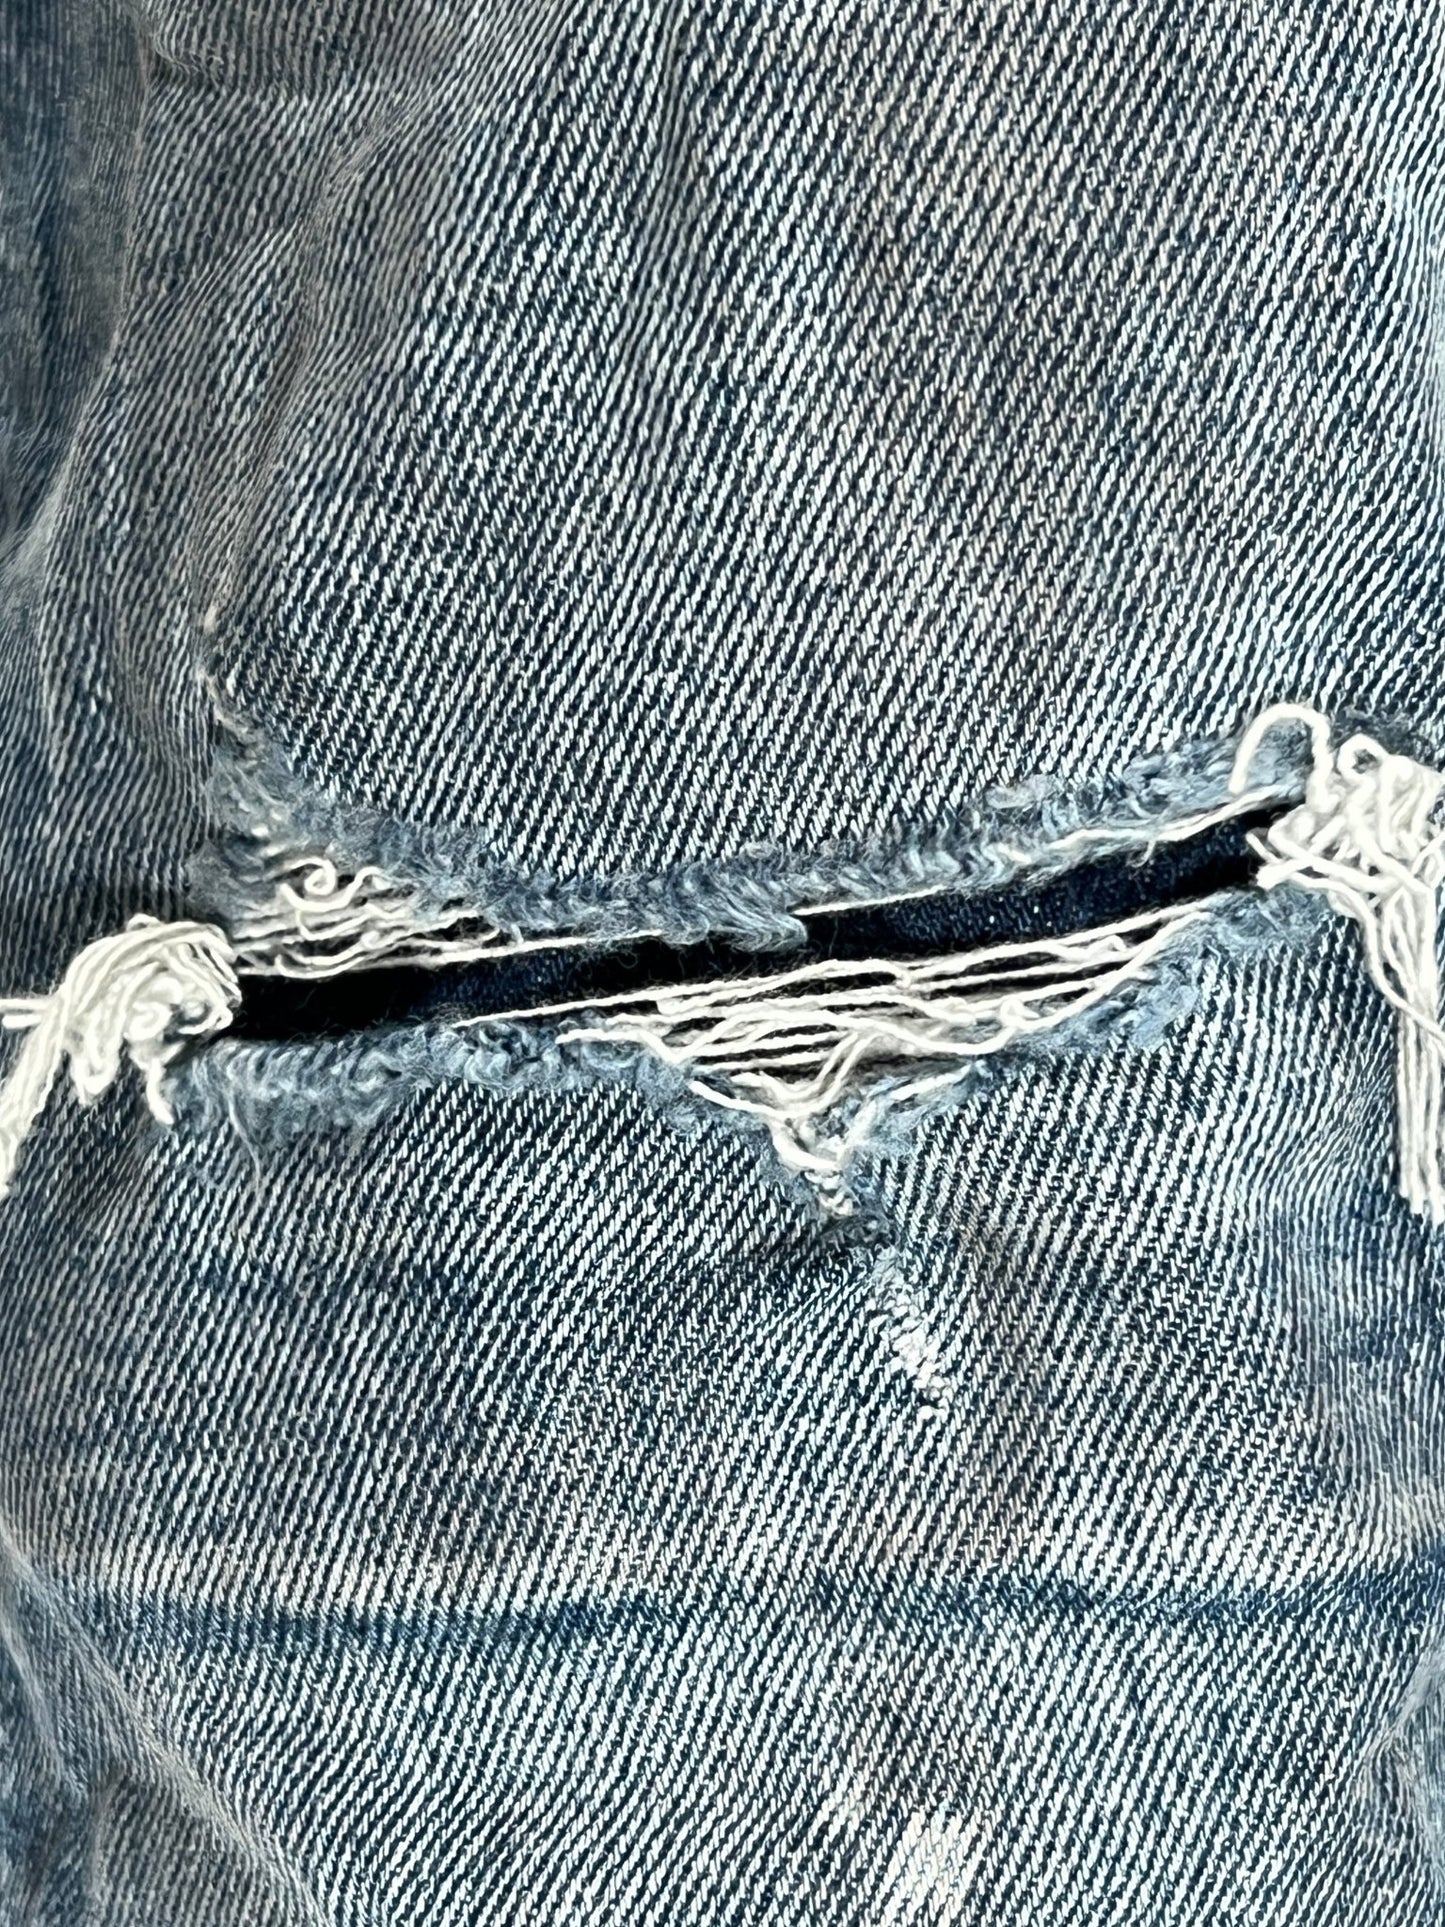 A pair of PURPLE BRAND vintage blue jeans with a hole in the pocket.